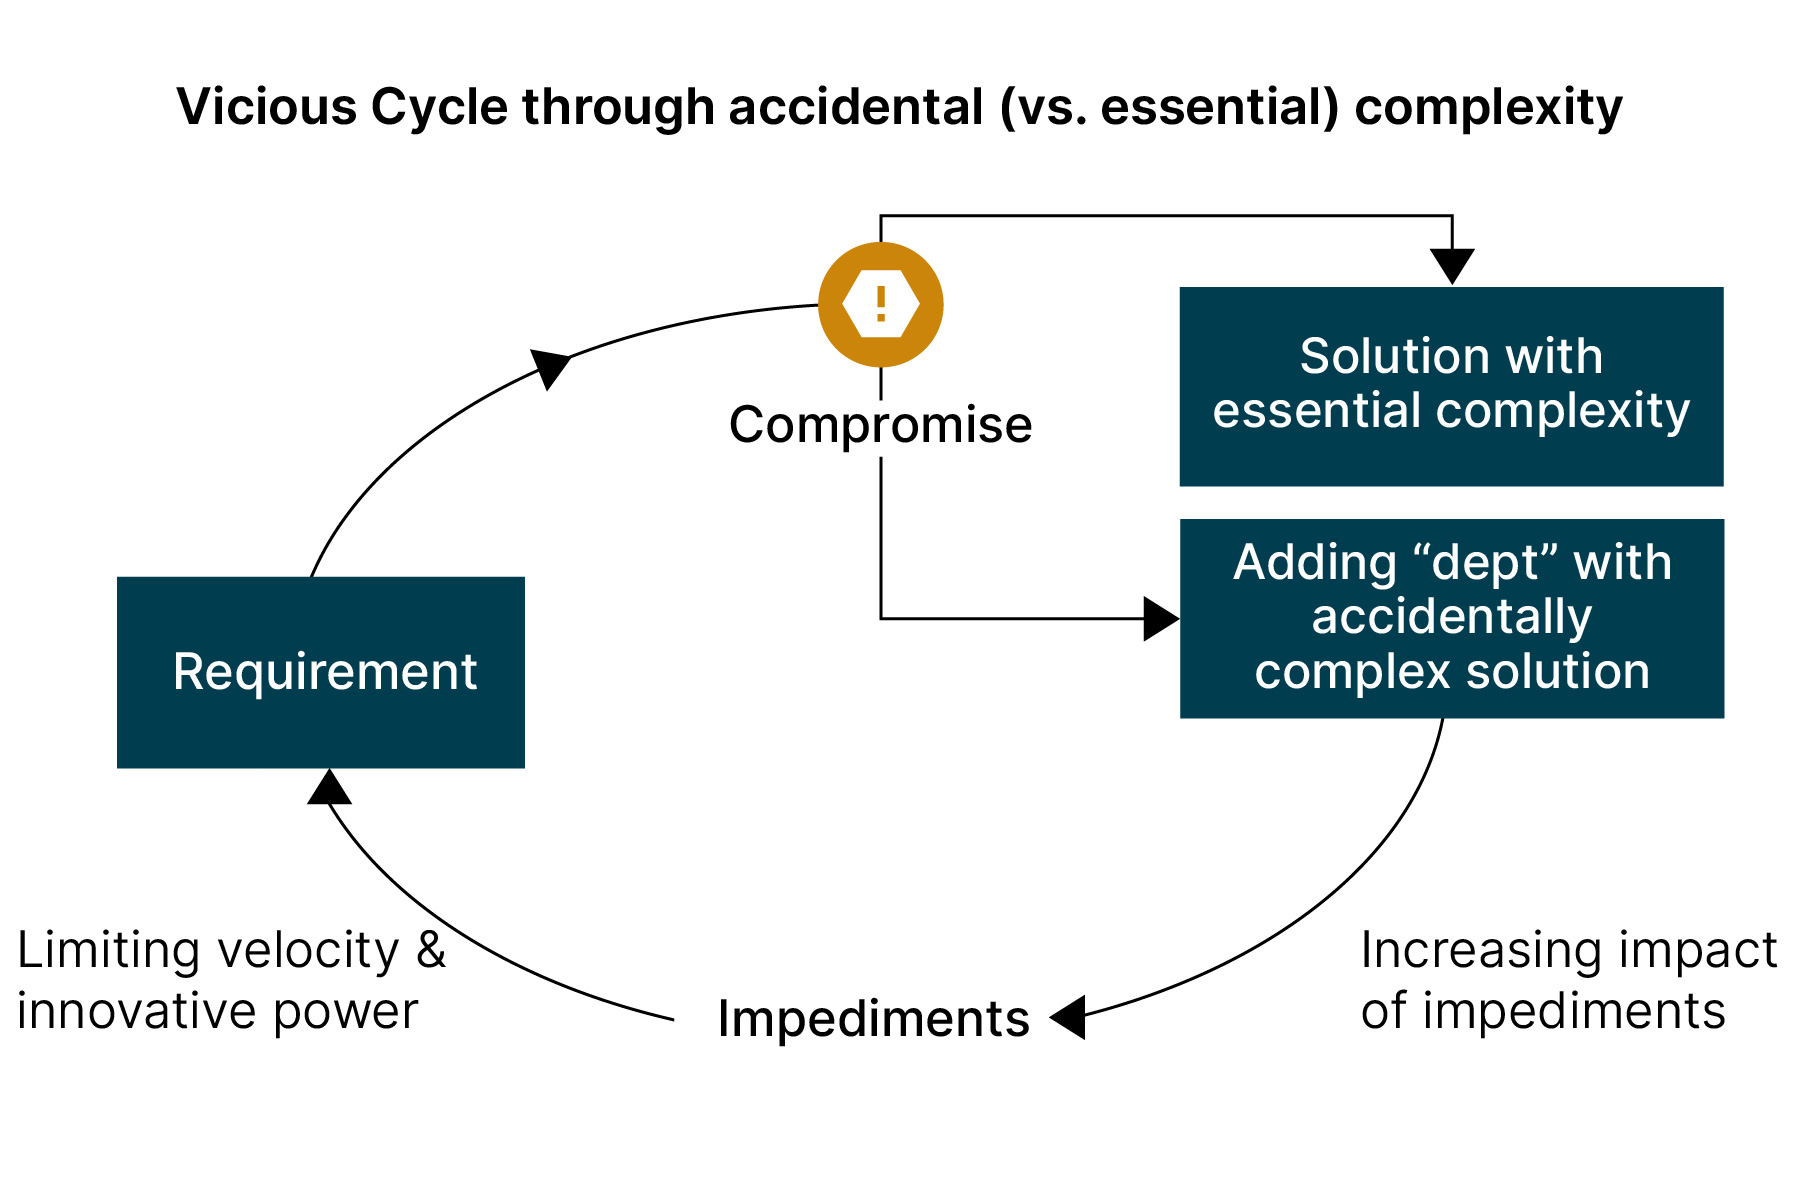 Compromises in the implementation of requirements lead to a vicious cycle in which accidental complexity is piling up. This debt inhibits the future velocity and innovative power. 